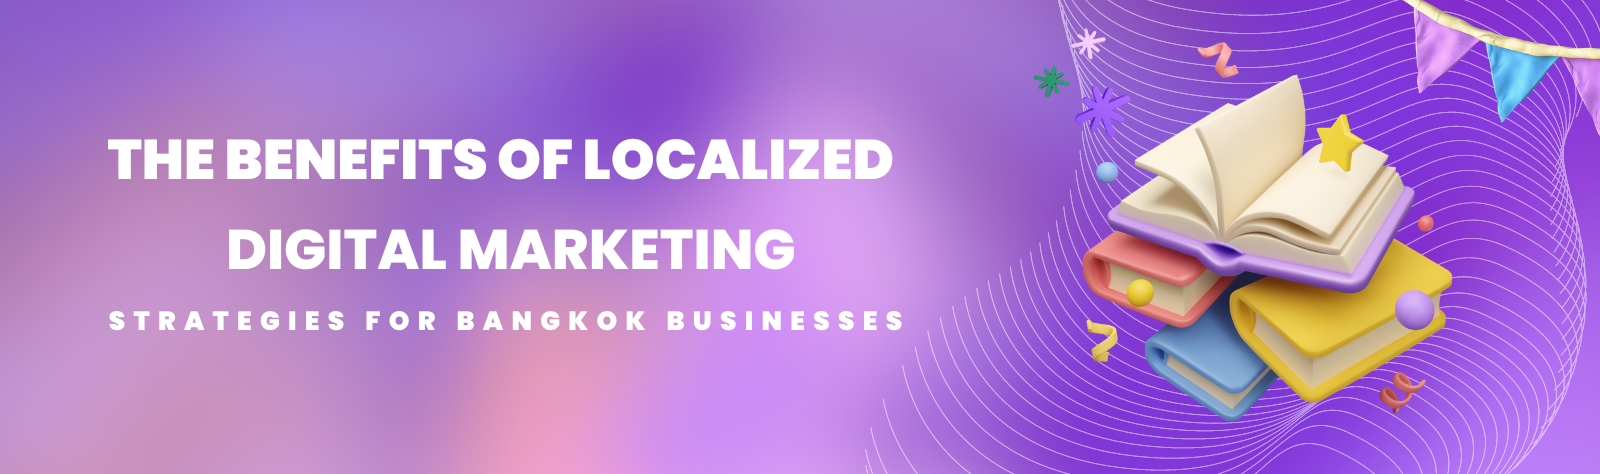 The Benefits of Localized Digital Marketing Strategies for Bangkok Businesses (2)